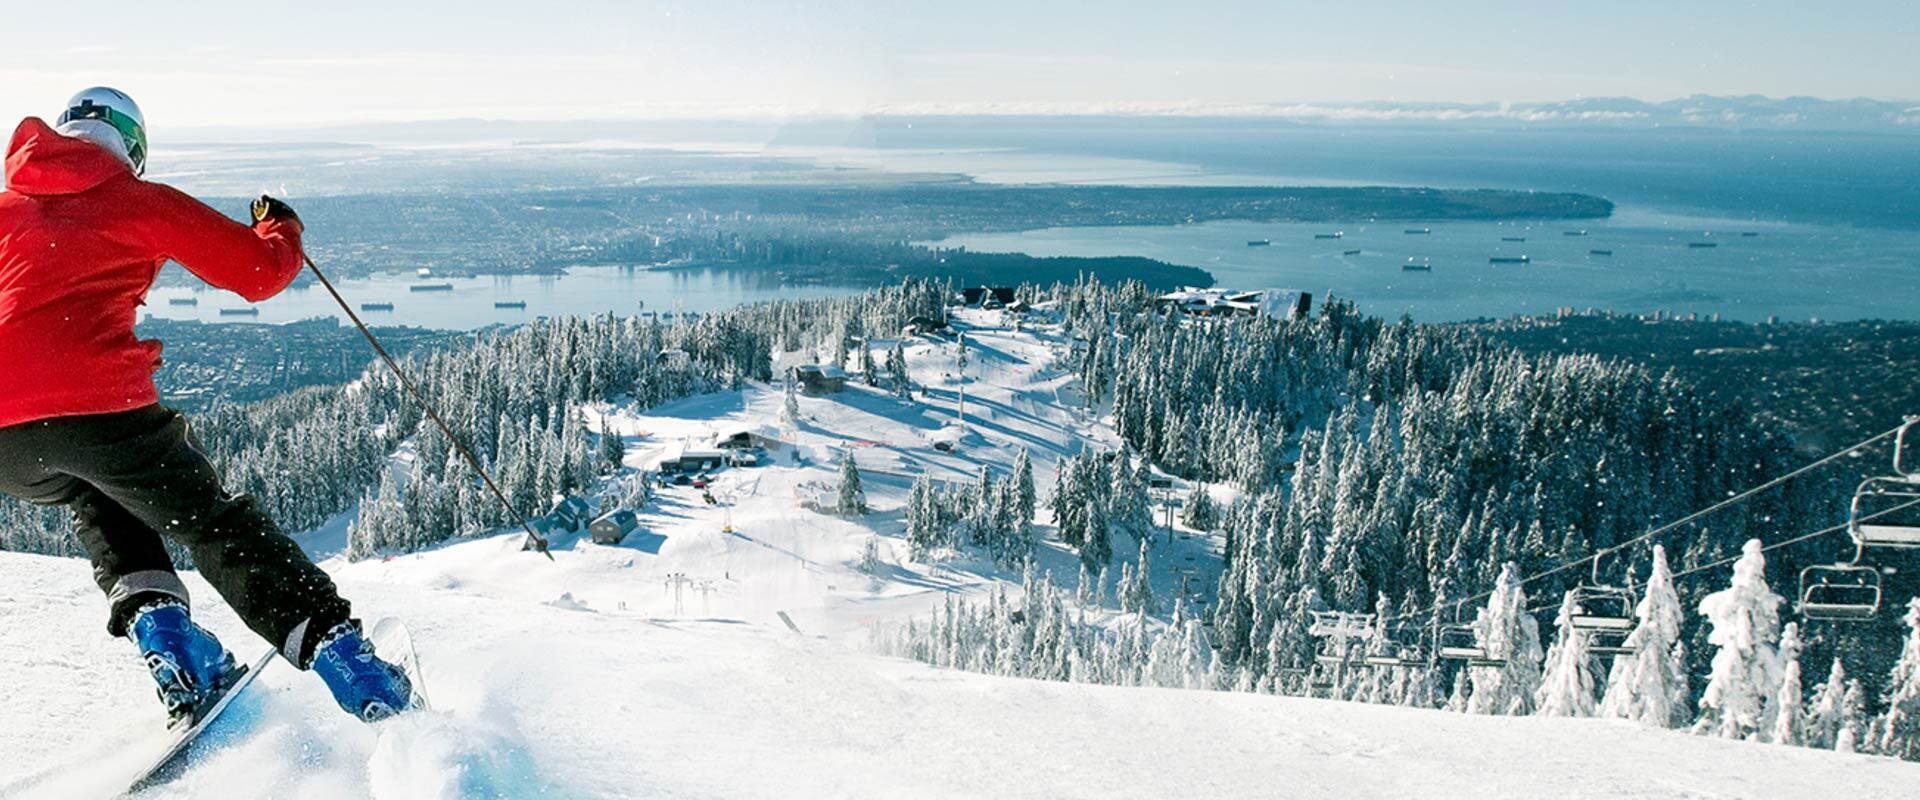 Must-Haves for Winter | Grouse Mountain - The Peak of Vancouver